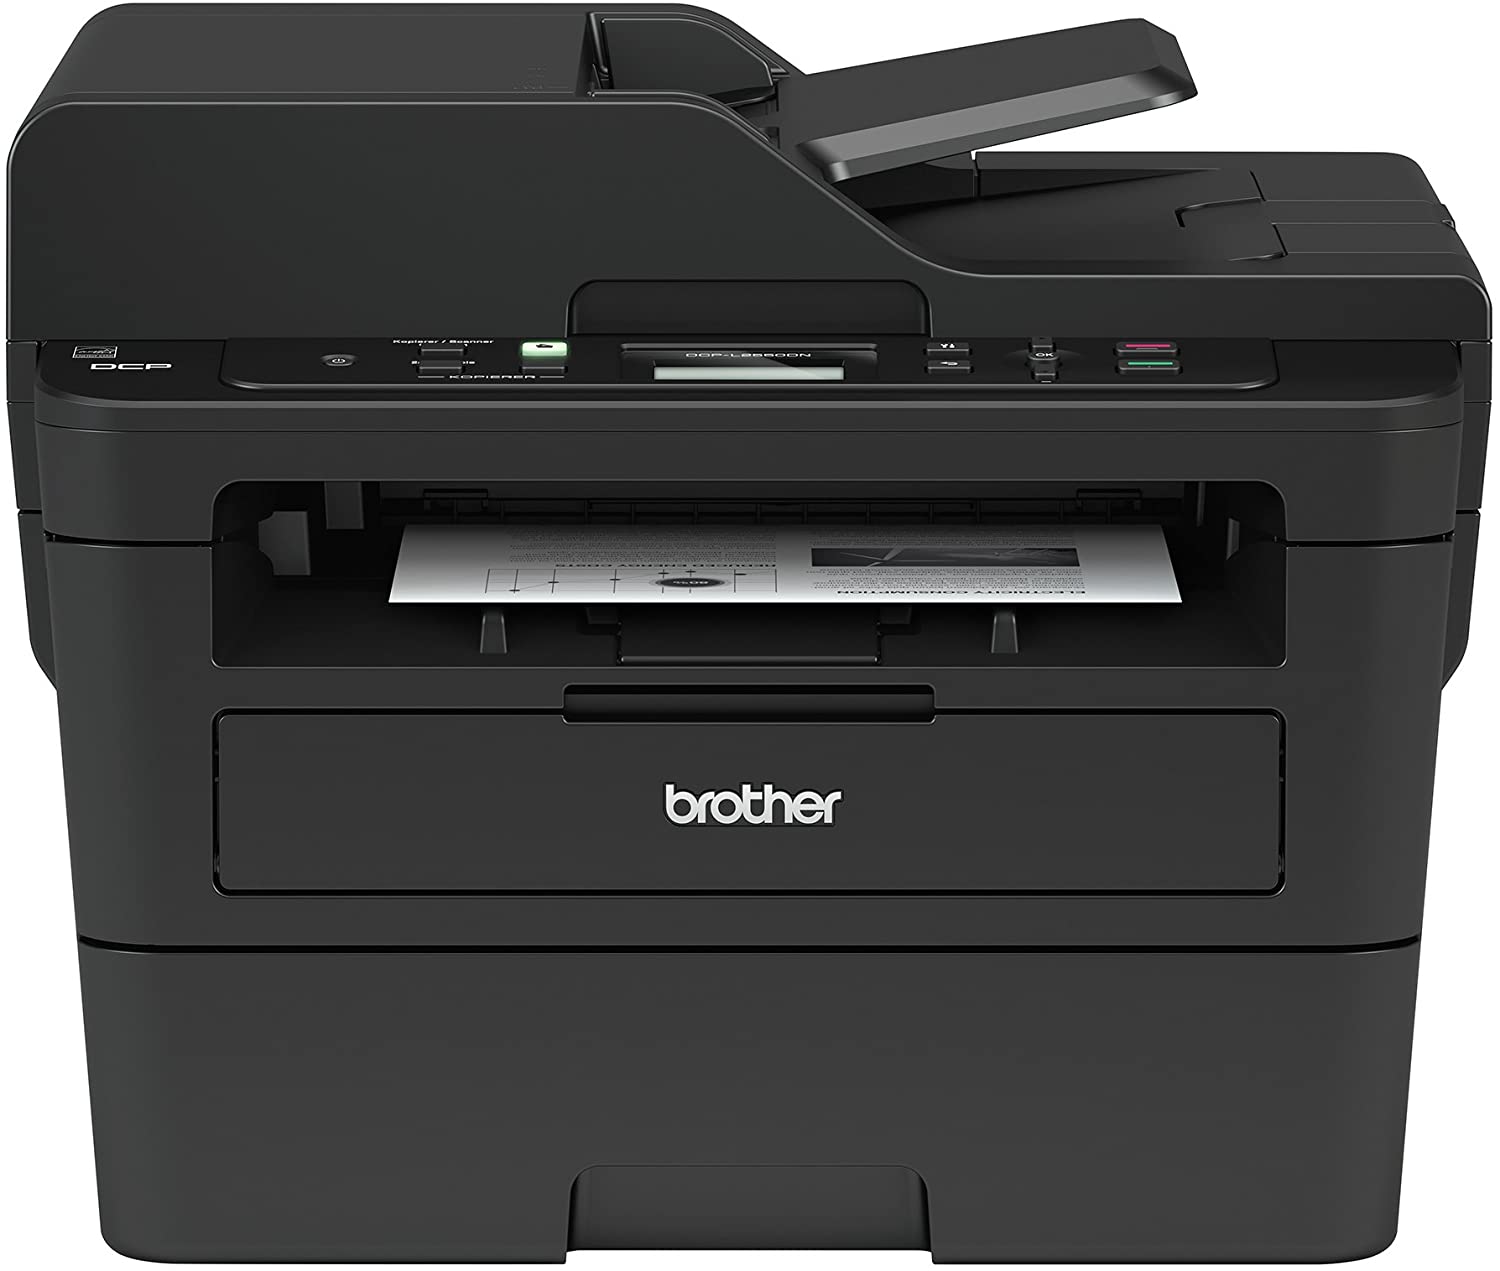 Brother DCP-L2550DW All-in-One Monochrome Mobile ready Laser Printer VIP